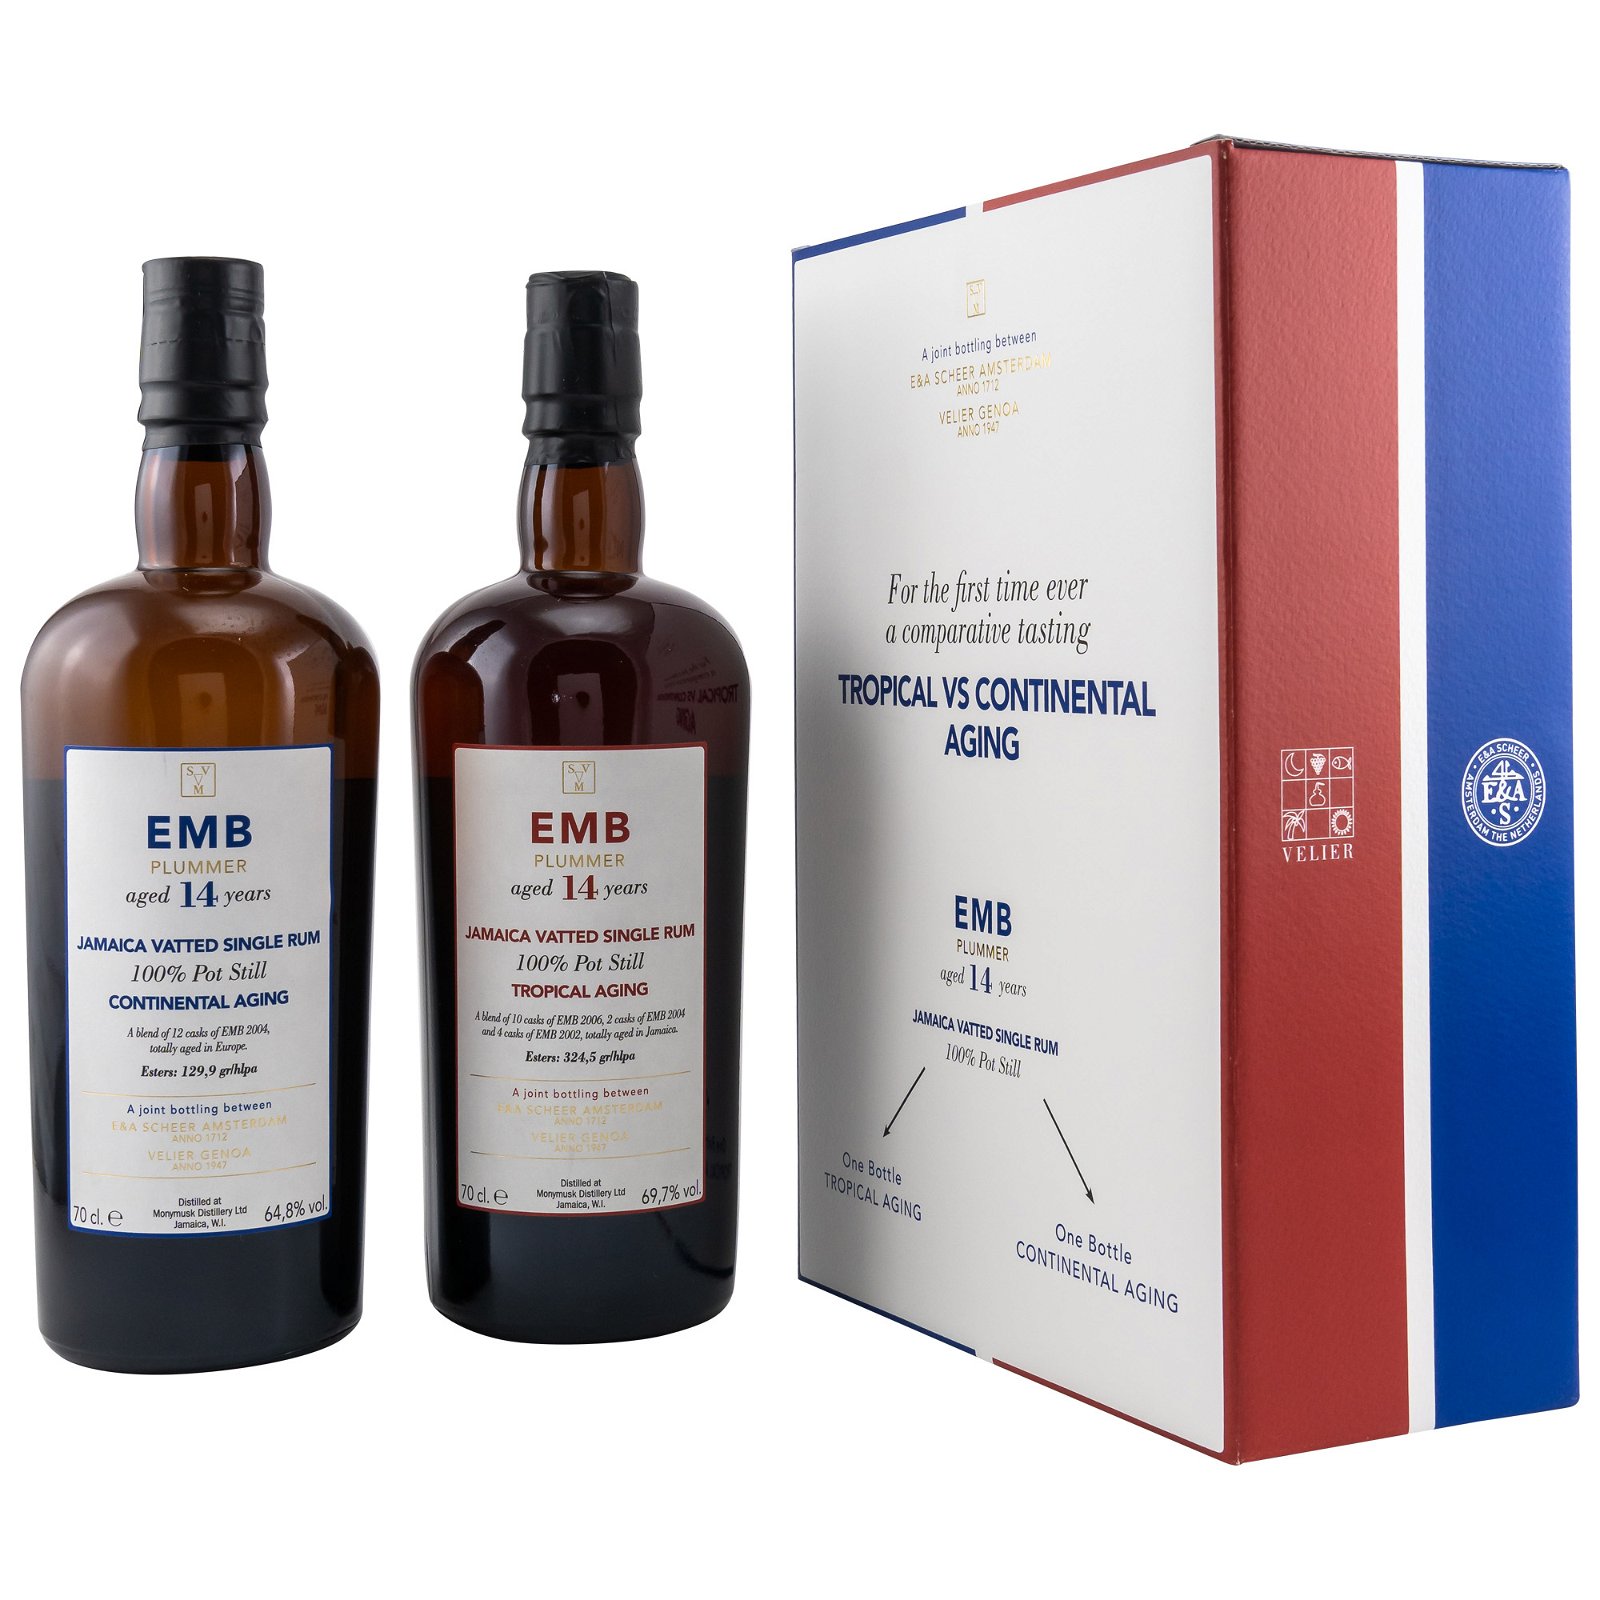 Monymusk 14 Jahre EMB Plummer Jamaica Vatted Single Rum Set (Tropical vs. Continental Aging)